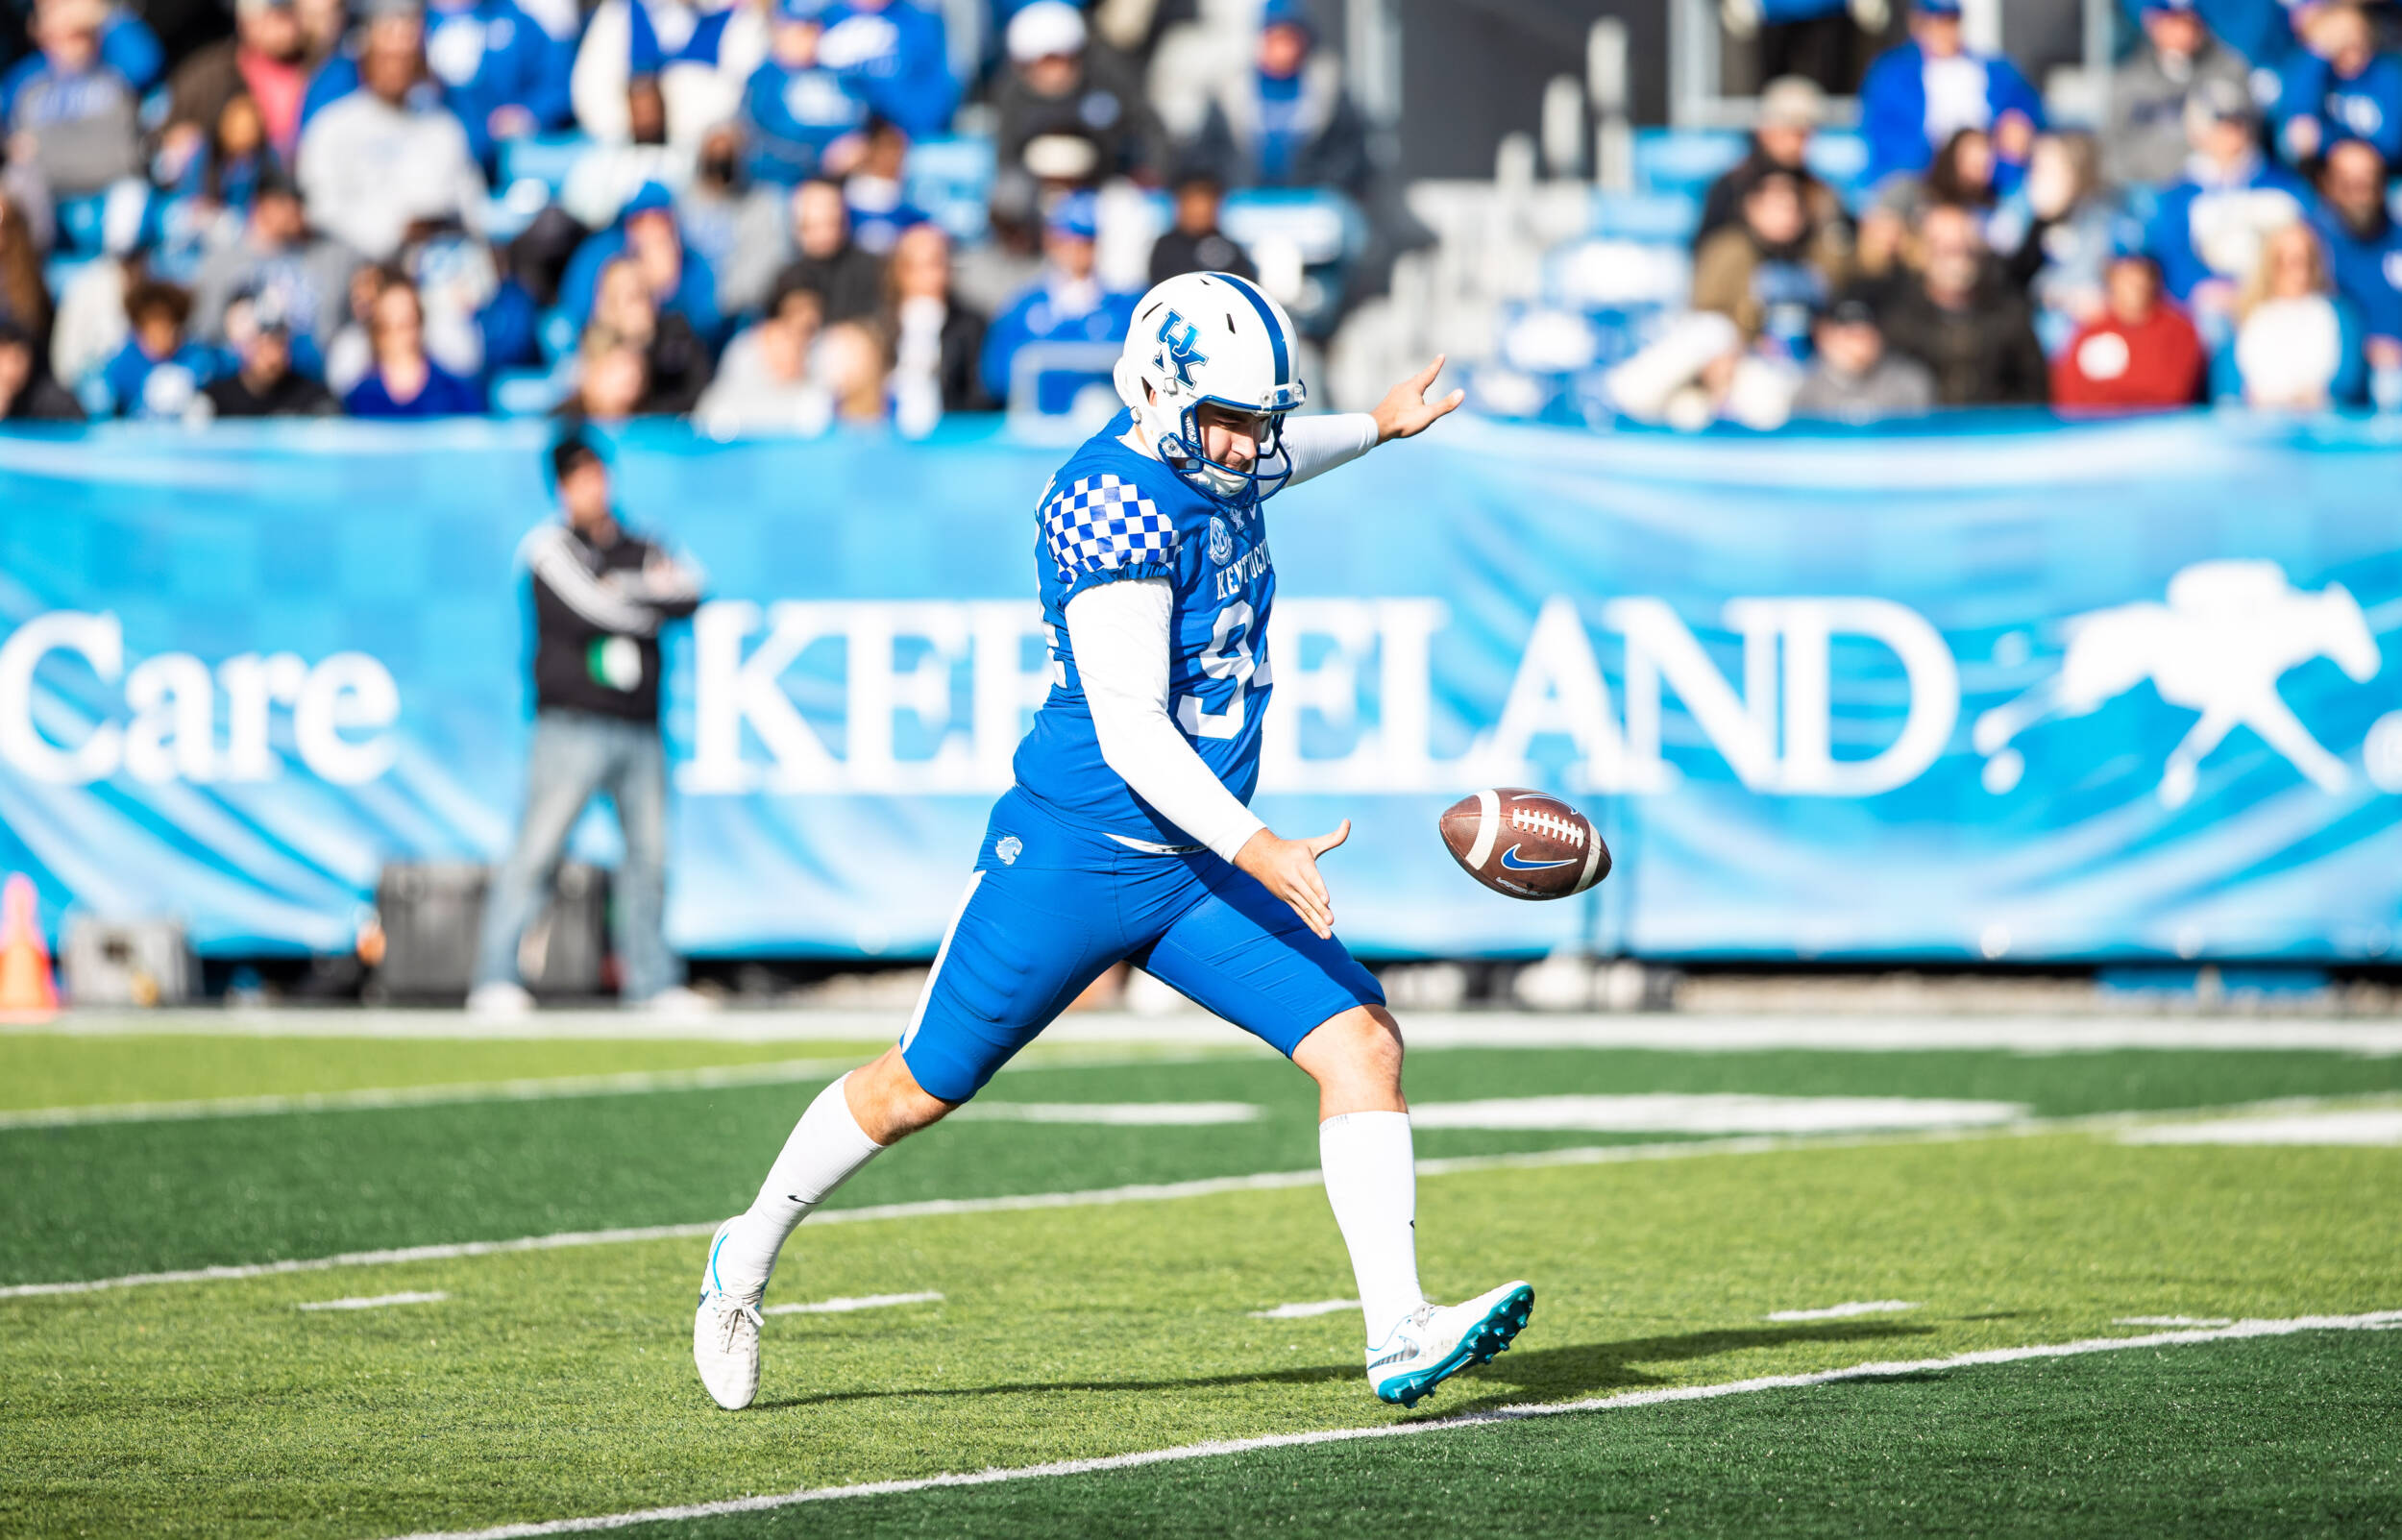 Colin Goodfellow Named to Ray Guy Award Watch List